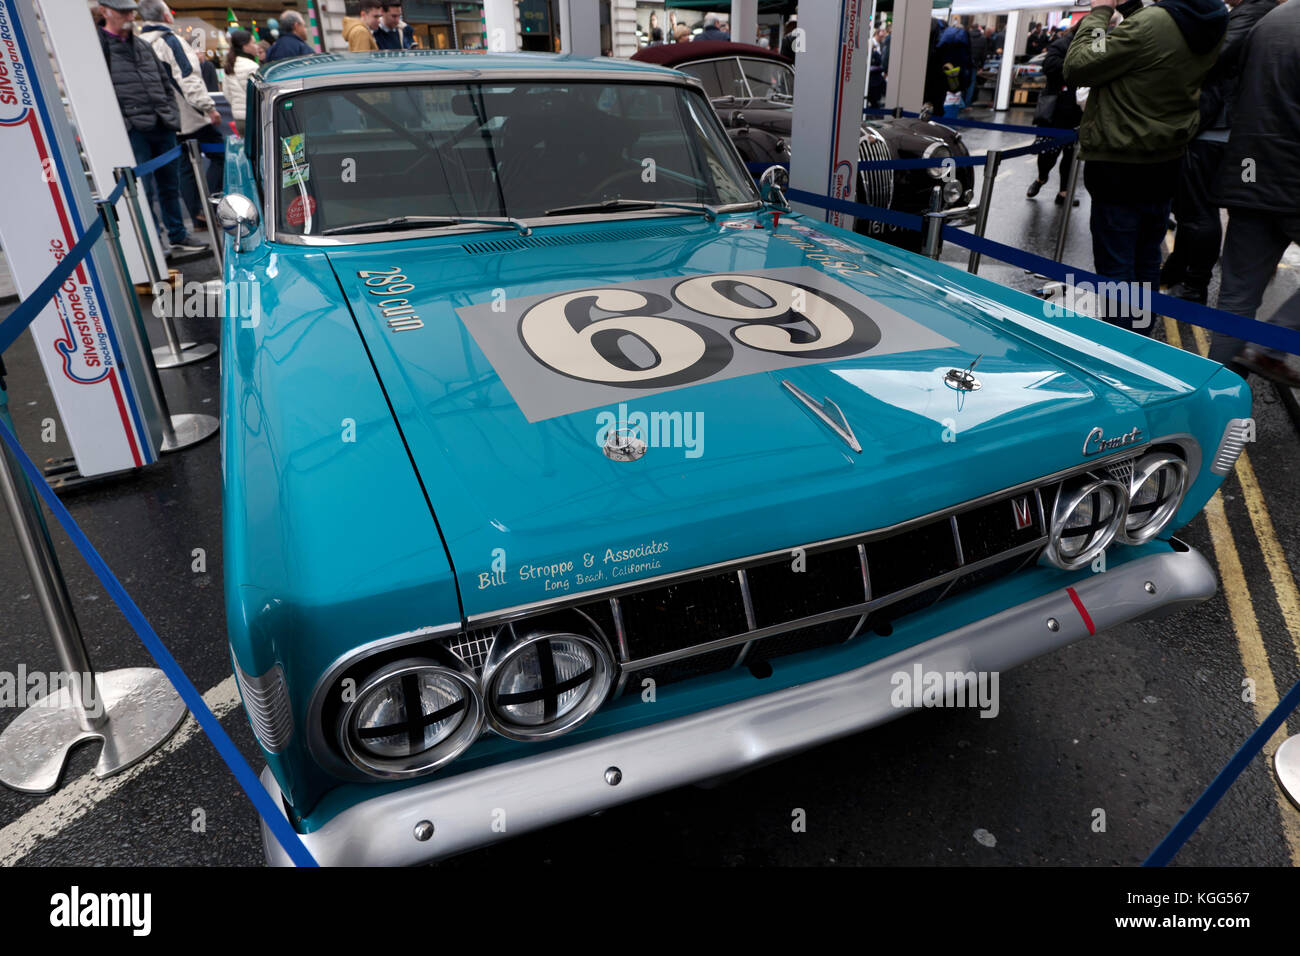 Front view of a  1964 Mercury Comet Cyclone race car, driven by Emanuele Pirro and Roger Wills,  on display at the Regents Street Motor Show 2017. Stock Photo